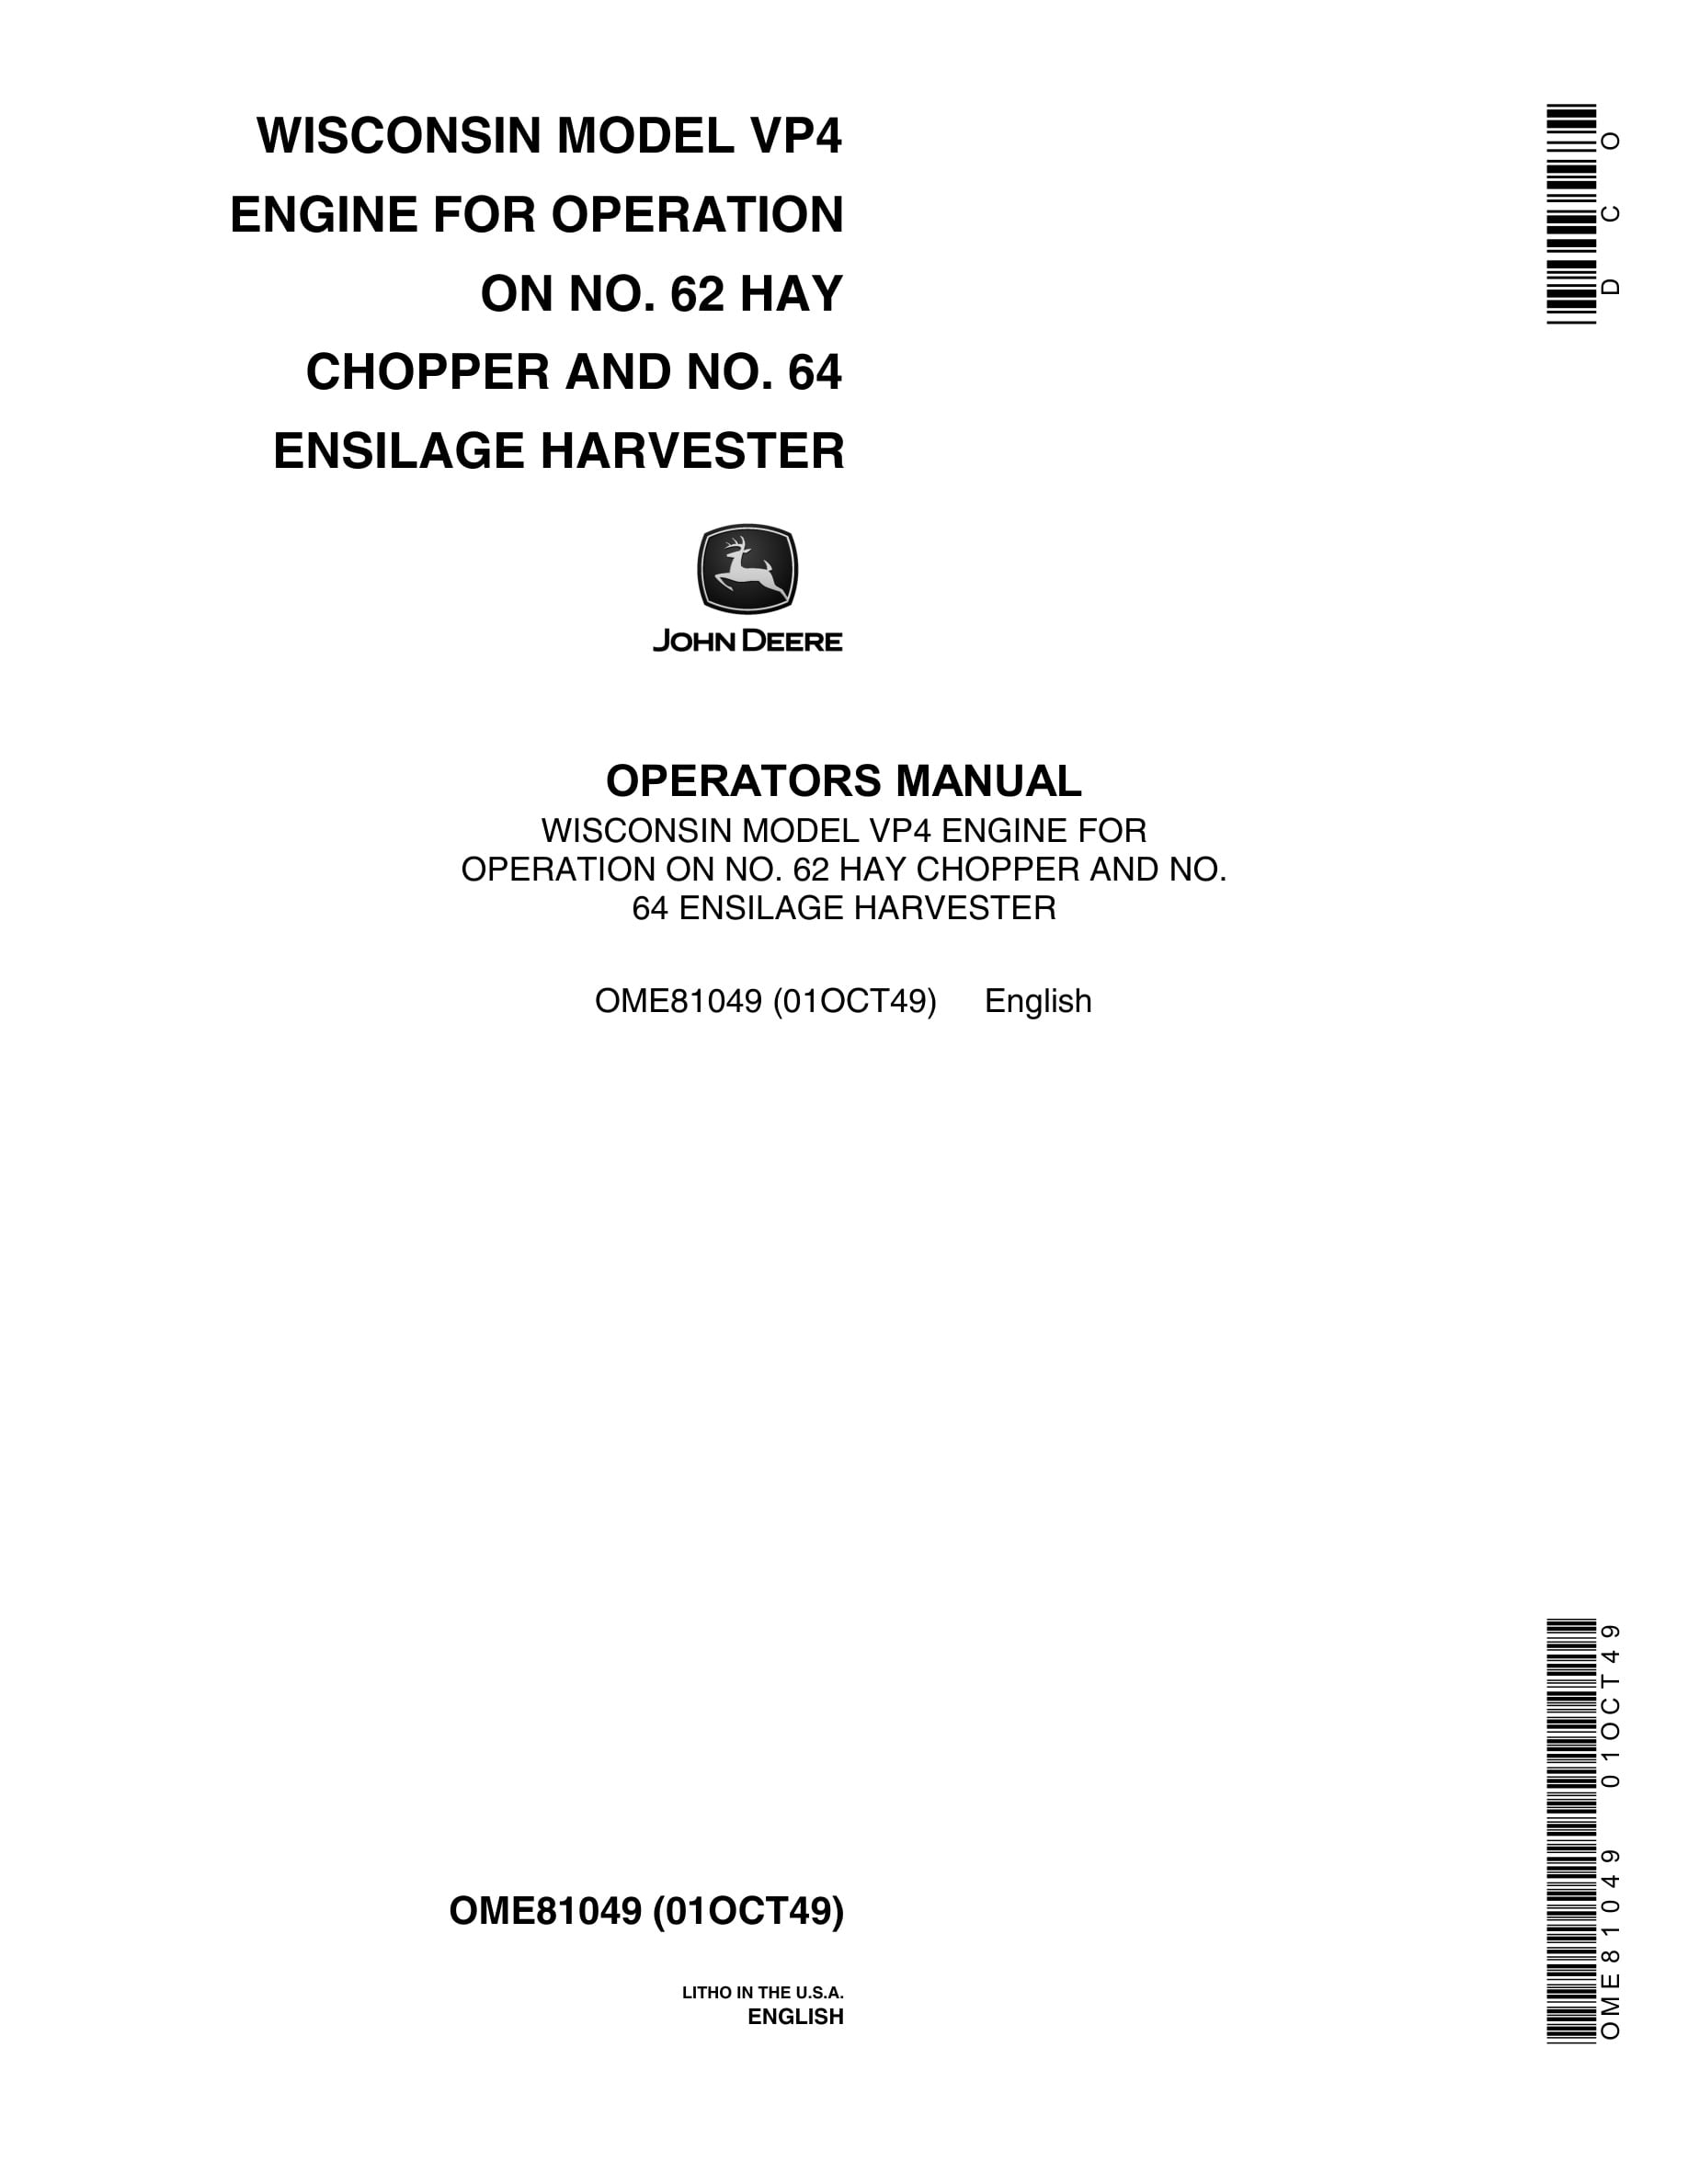 John Deere PowerTech WISCONSIN MODEL VP4 ENGINE FOR OPERATION ON NO.62 HAY CHOPPER AND NO.64 ENSILAGE HARVESTER Operator Manual OME81049-1